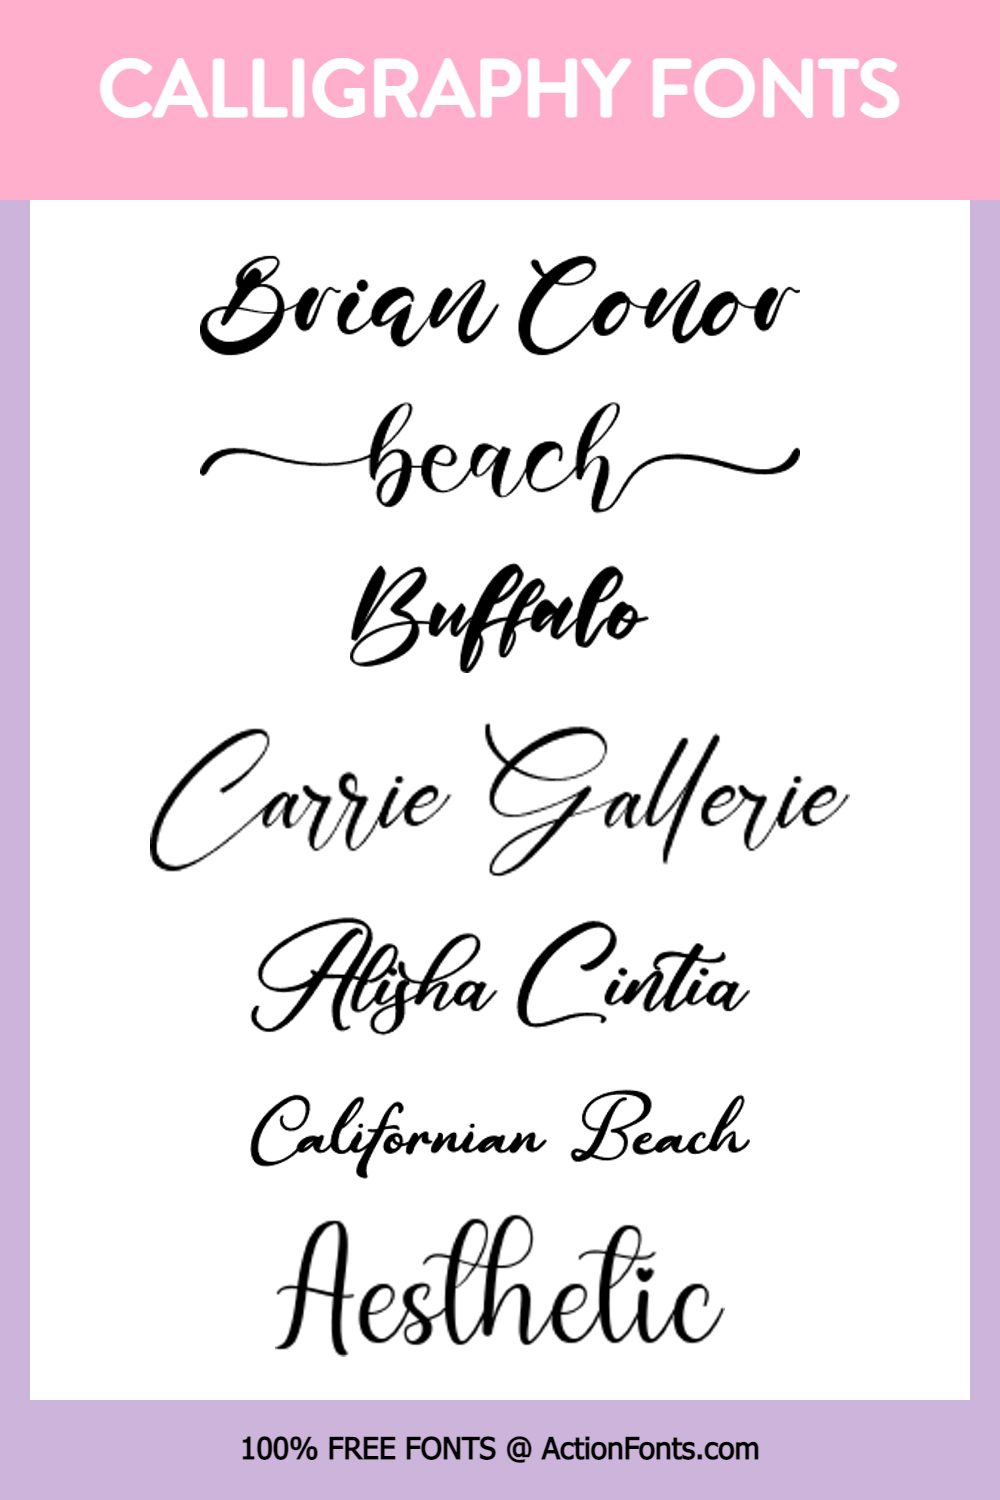 pinterest image of Calligraphy fonts